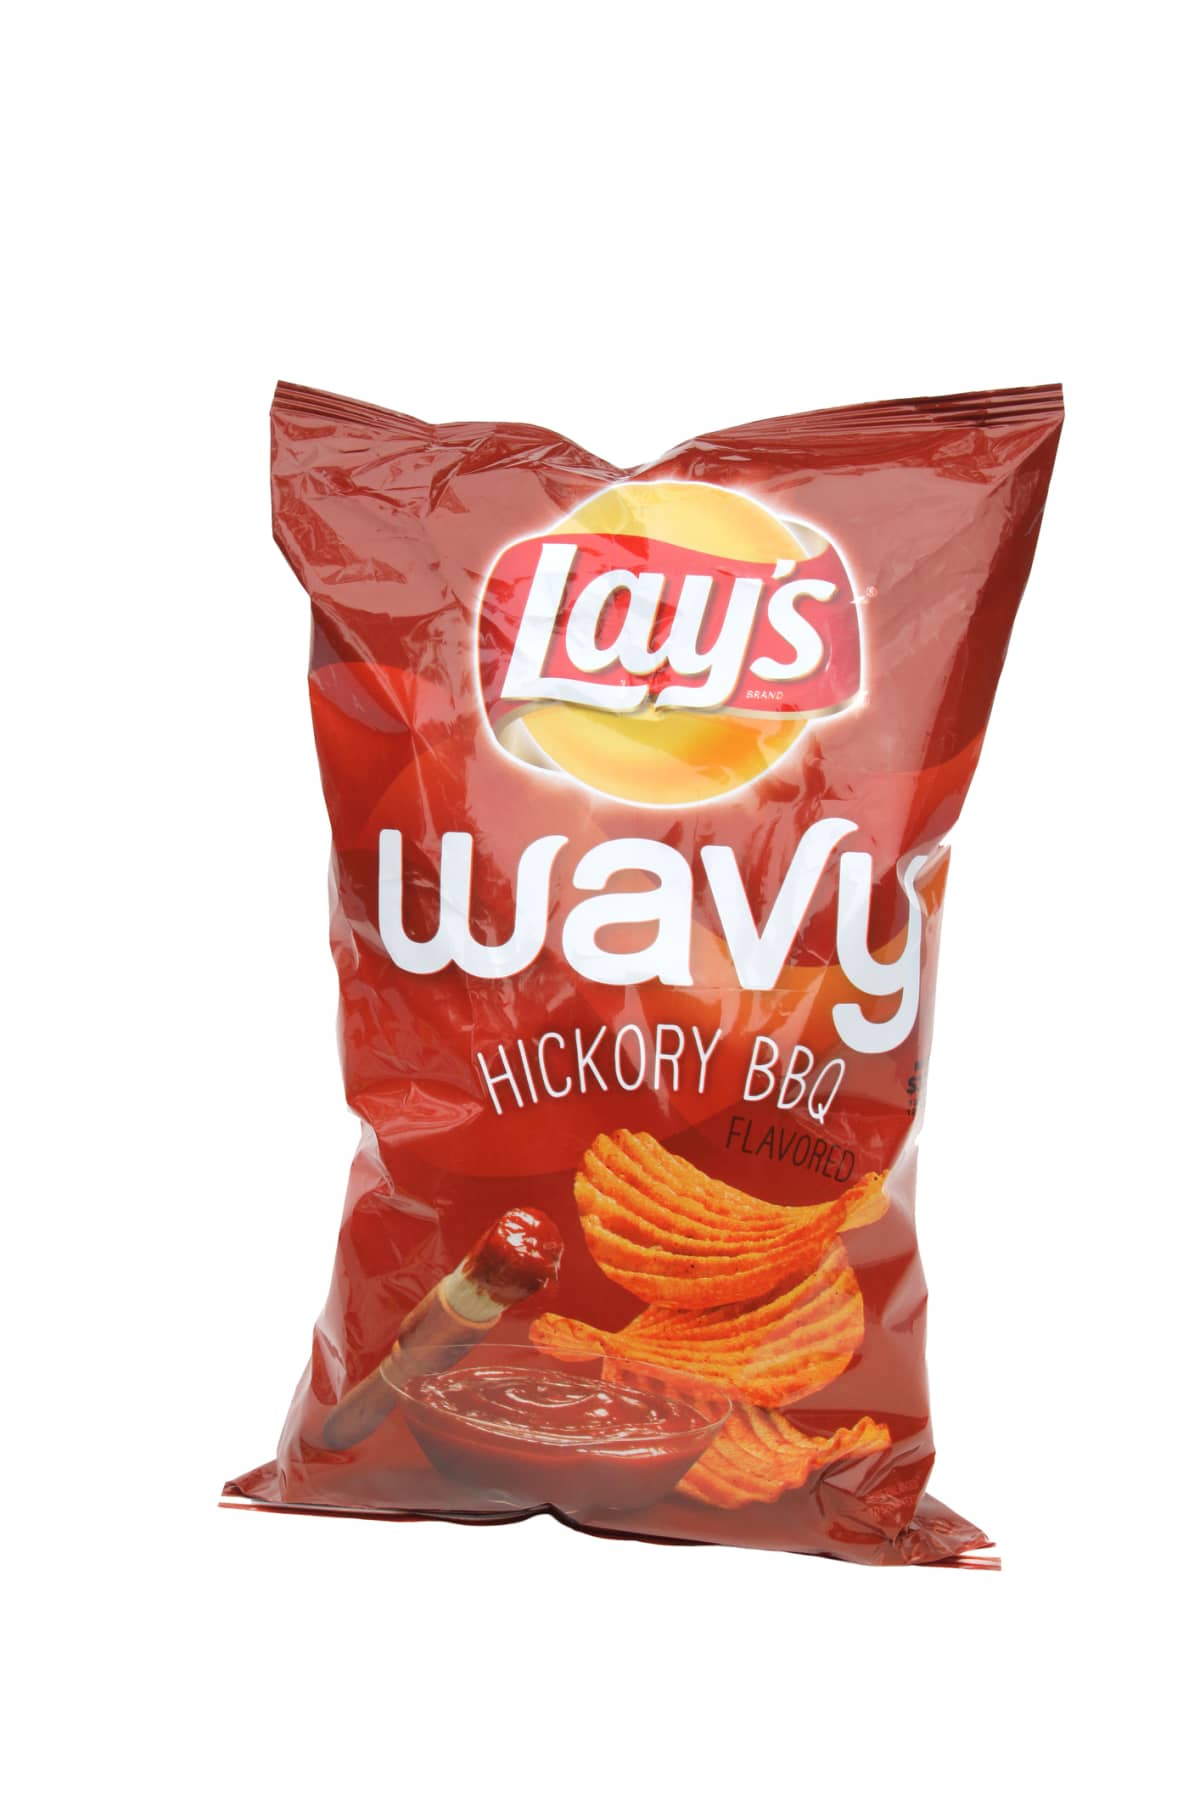 West Palm Beach, USA - January 31, 2016: A package of Lay's Wavy Hickory BBQ potato chips on a white background. Lay's potato chips are made by Frito Lay Inc. 